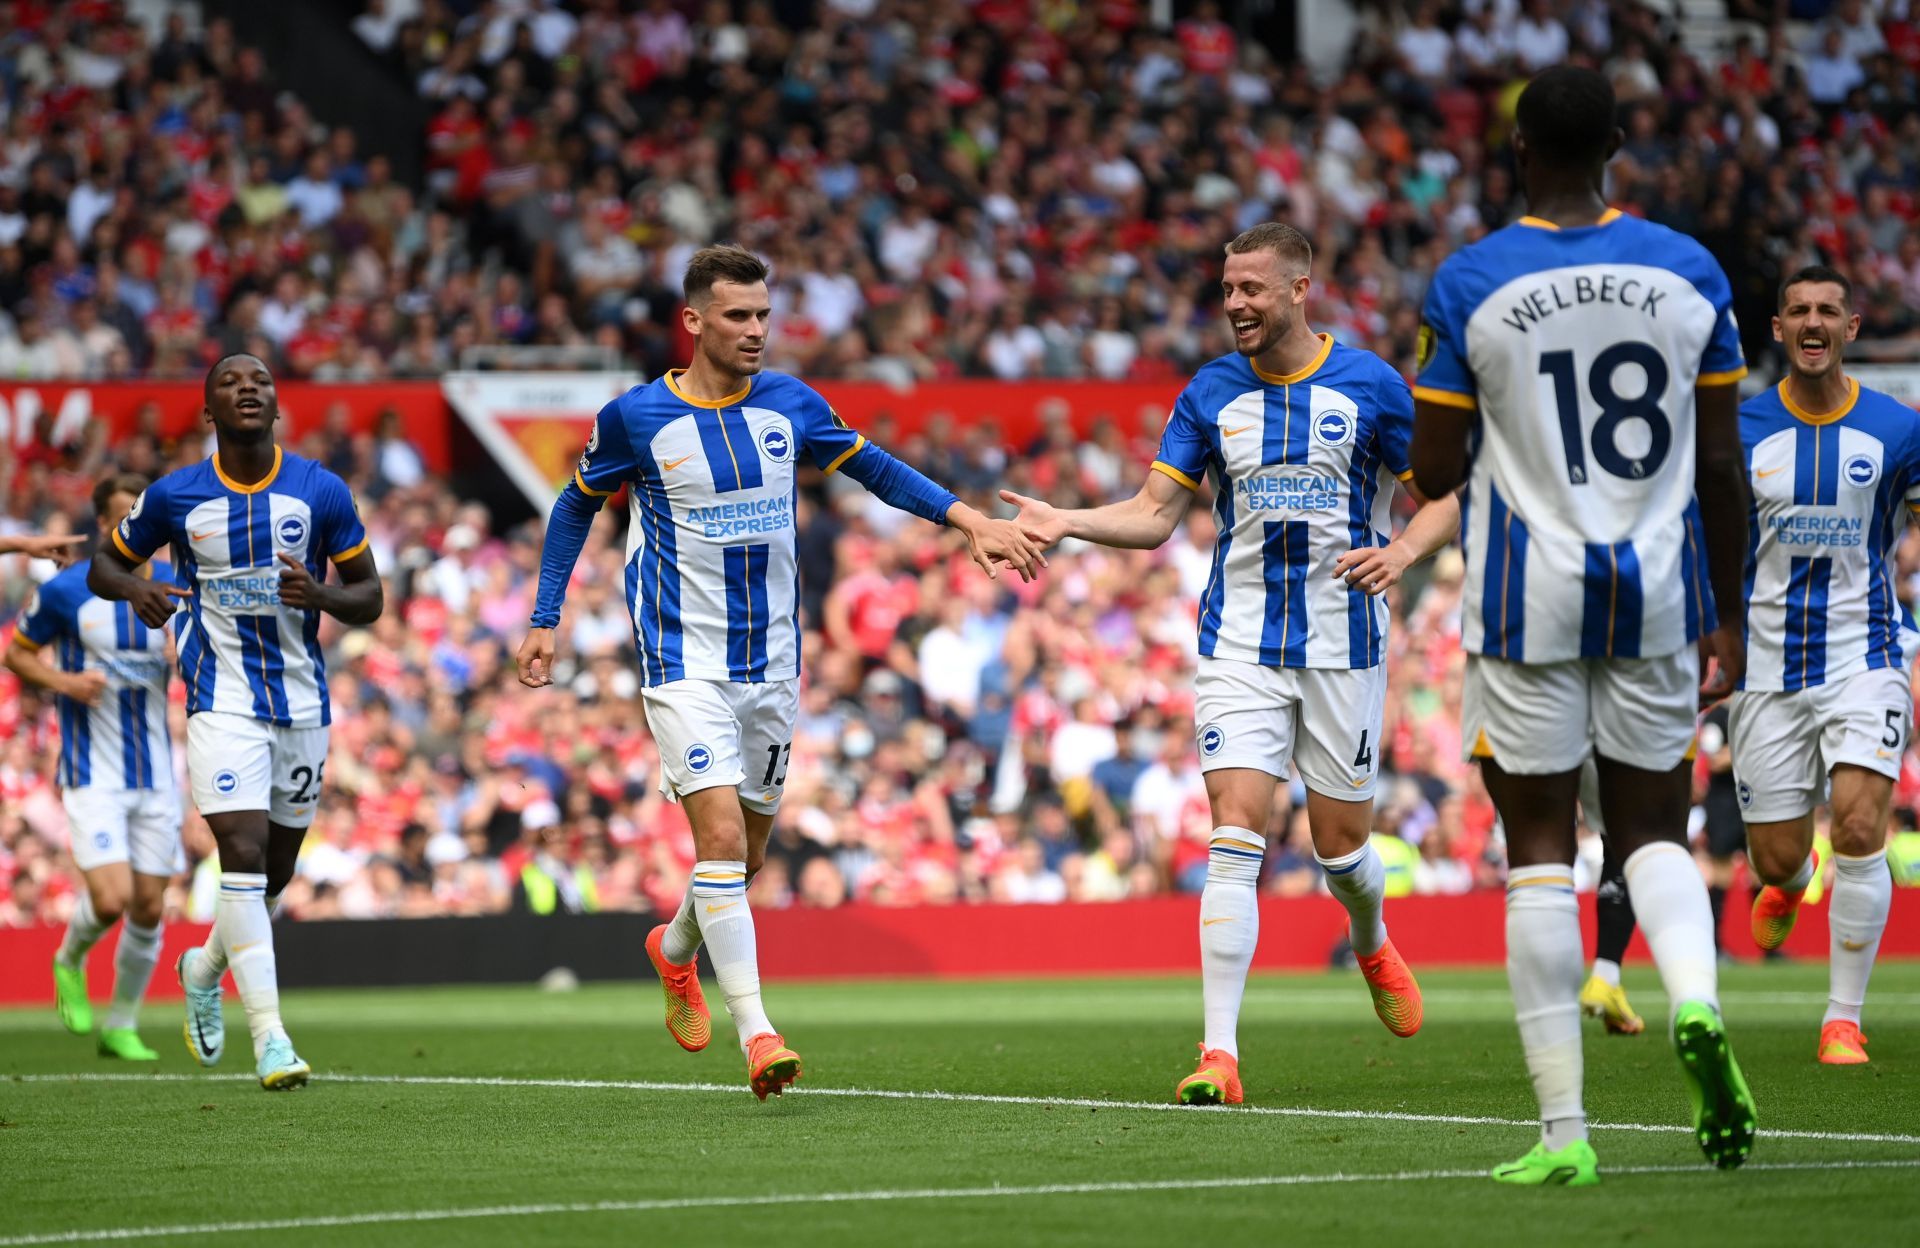 A much deserved victory for Brighton as they kick off their campaign with a victory